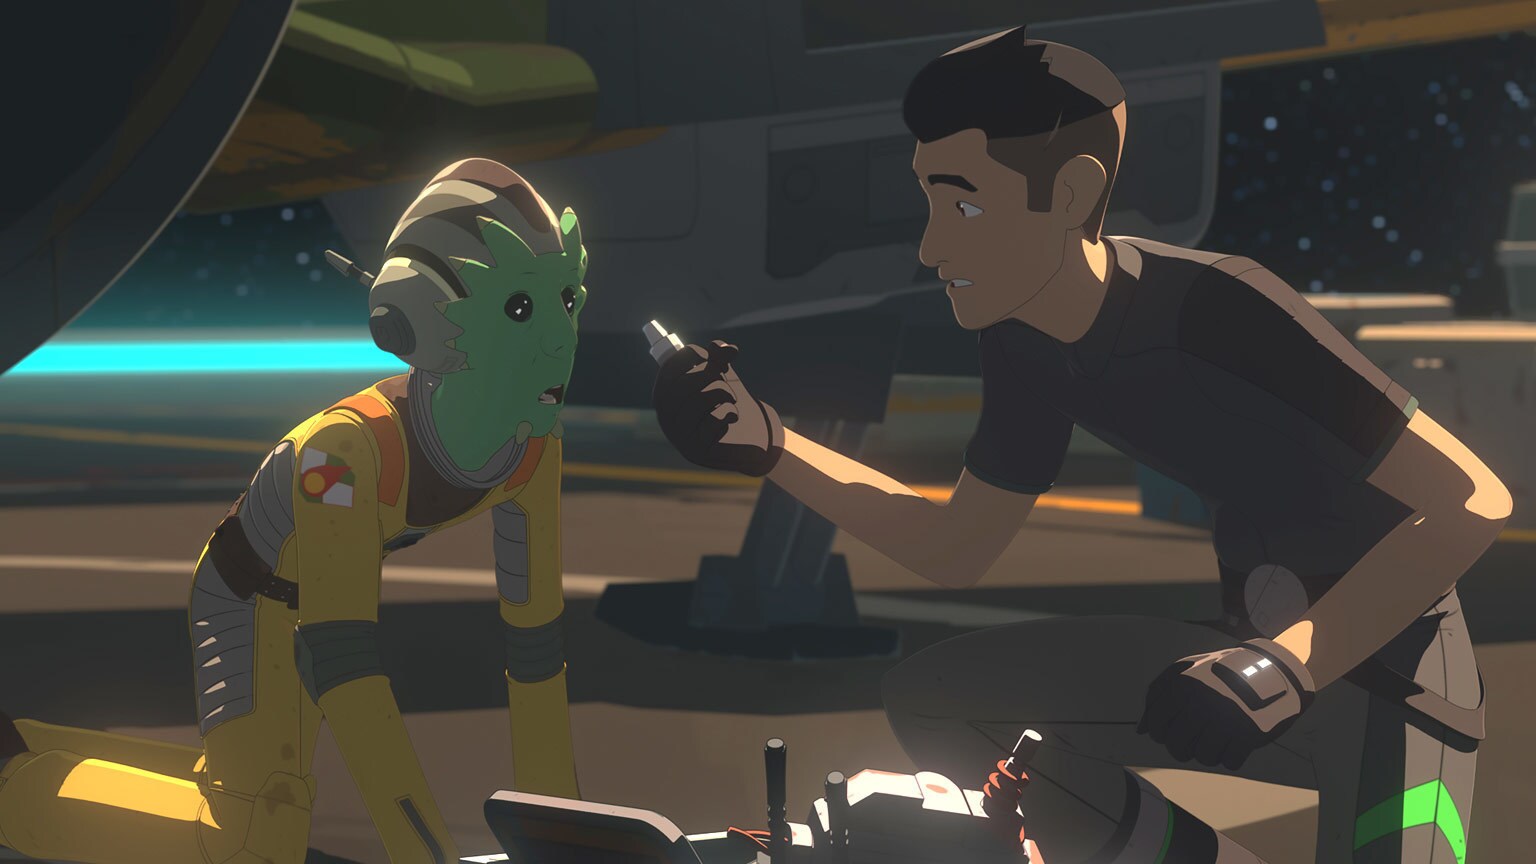 Bucket's List Extra: 5 Fun Facts from "The Escape - Part 1" - Star Wars Resistance